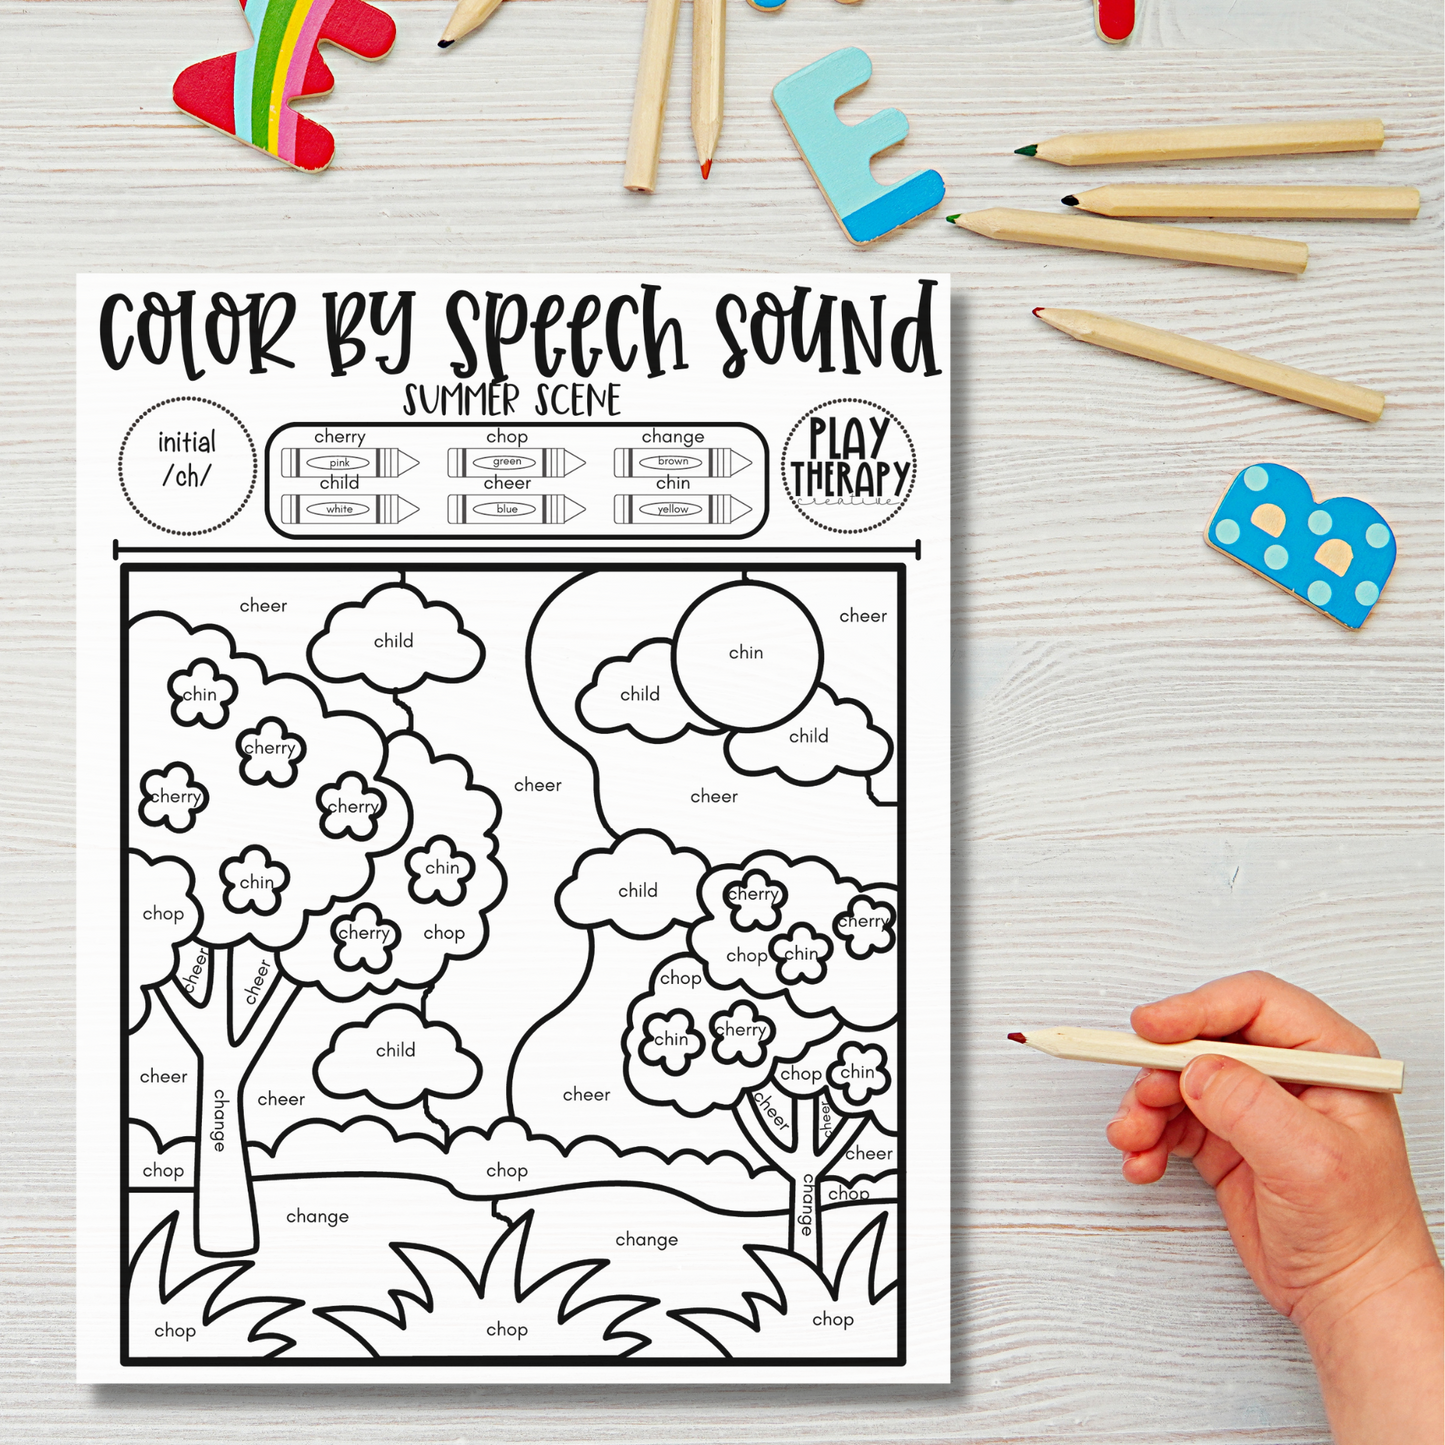 /ch/ Sound Summer Themed Color-by-Speech-Sounds for Speech Therapy